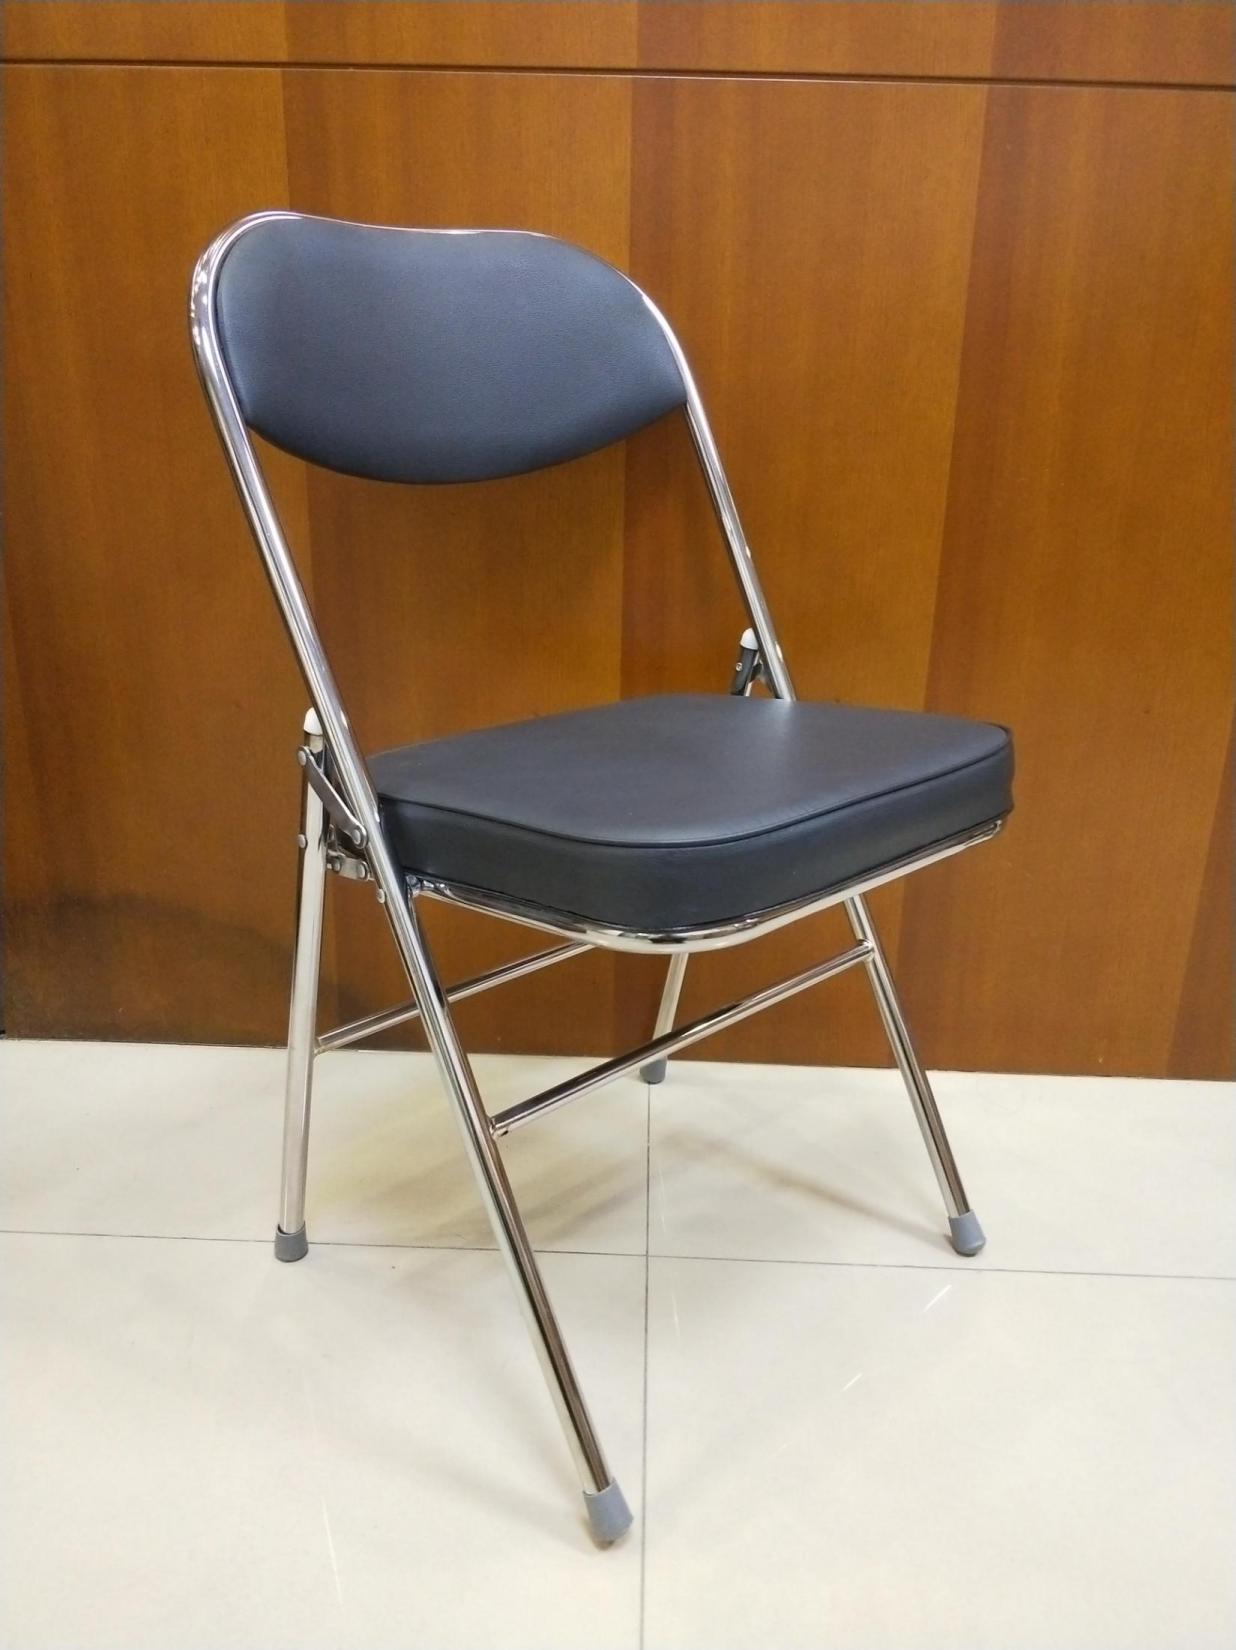 Foldable PU Leather Dining Chair Metal Leg Chromed Wholesale Folding Chairs